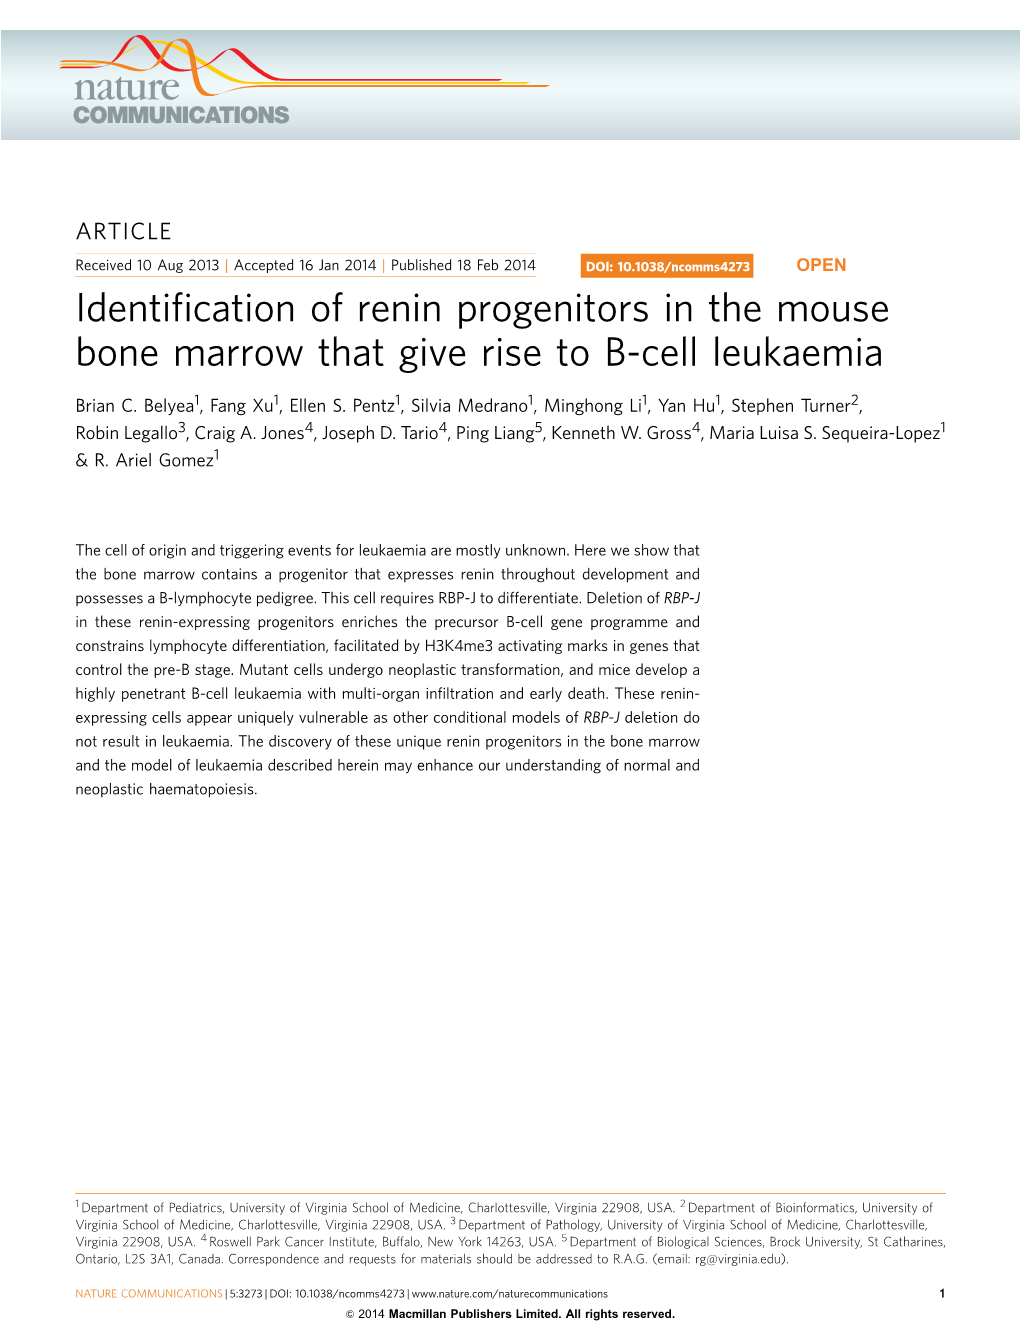 Identification of Renin Progenitors in the Mouse Bone Marrow That Give Rise to B-Cell Leukaemia